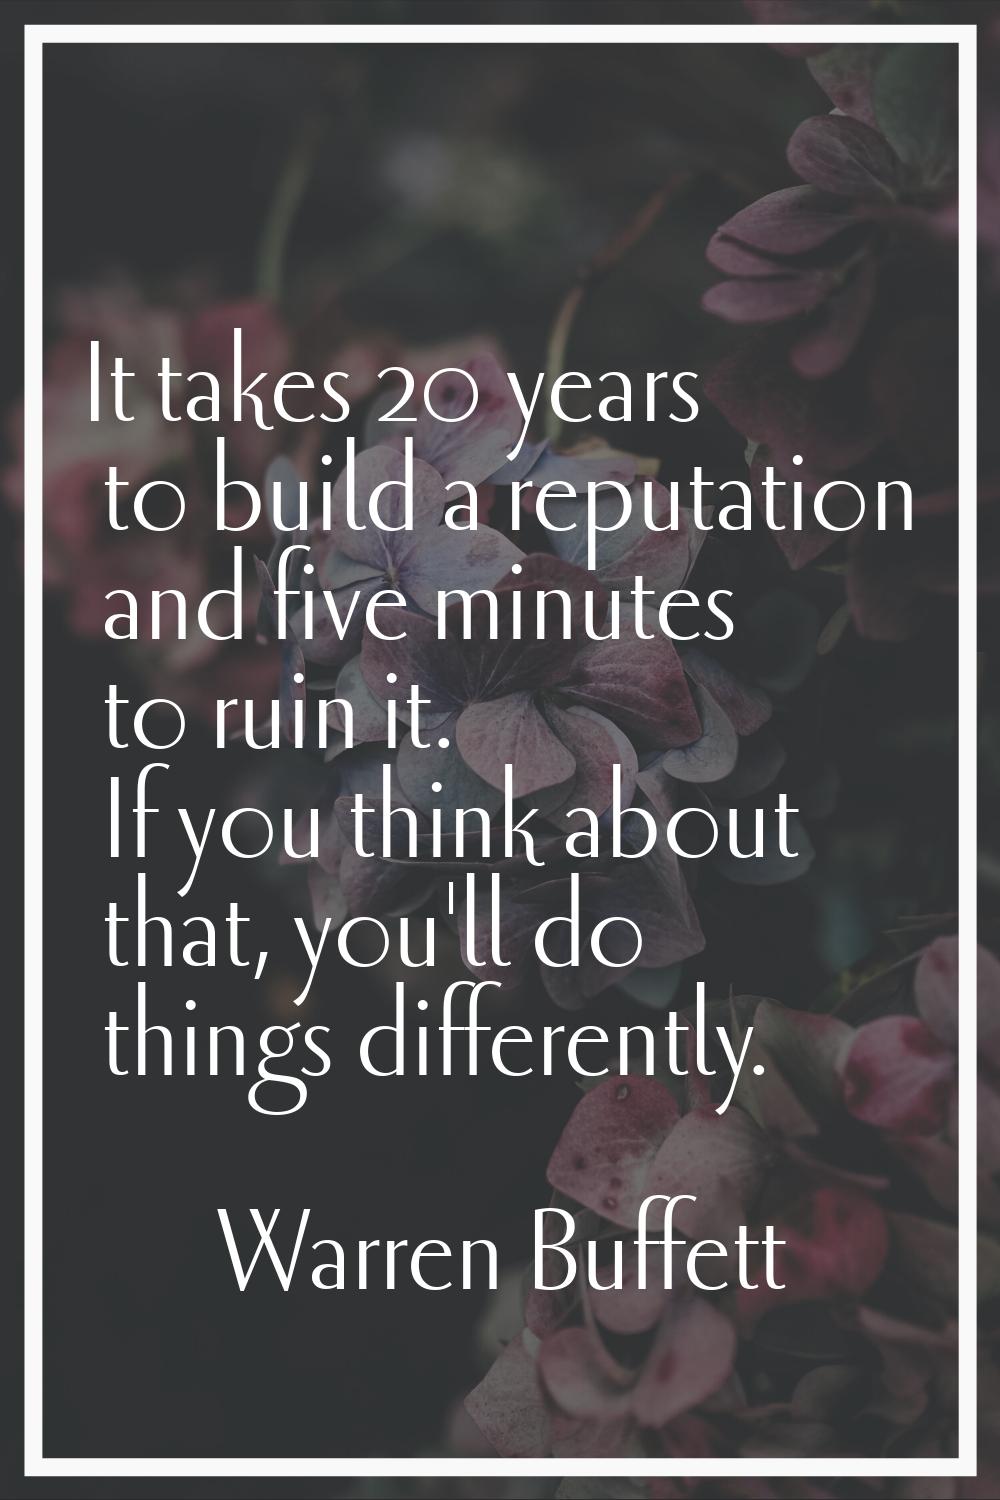 It takes 20 years to build a reputation and five minutes to ruin it. If you think about that, you'l